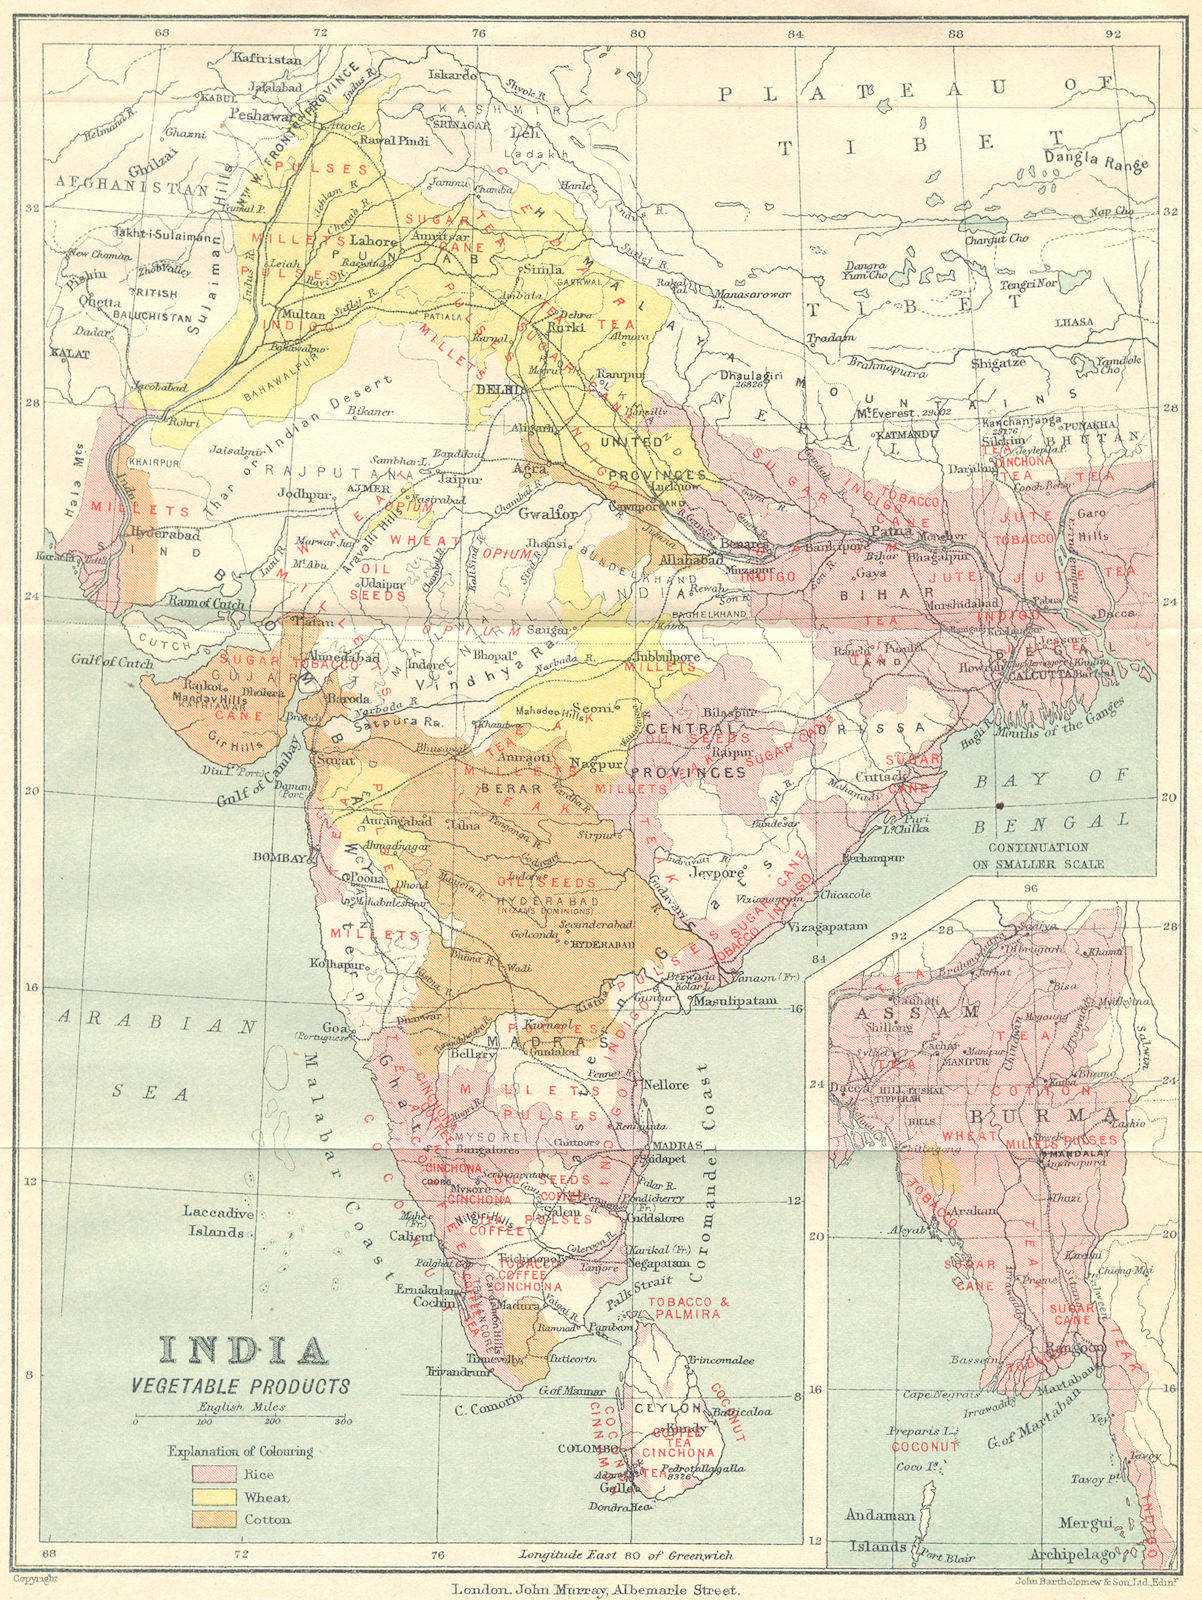 INDIA. Agricultural produce. Rice Wheat Cotton Sugar Opium Coffee Tea 1924 map